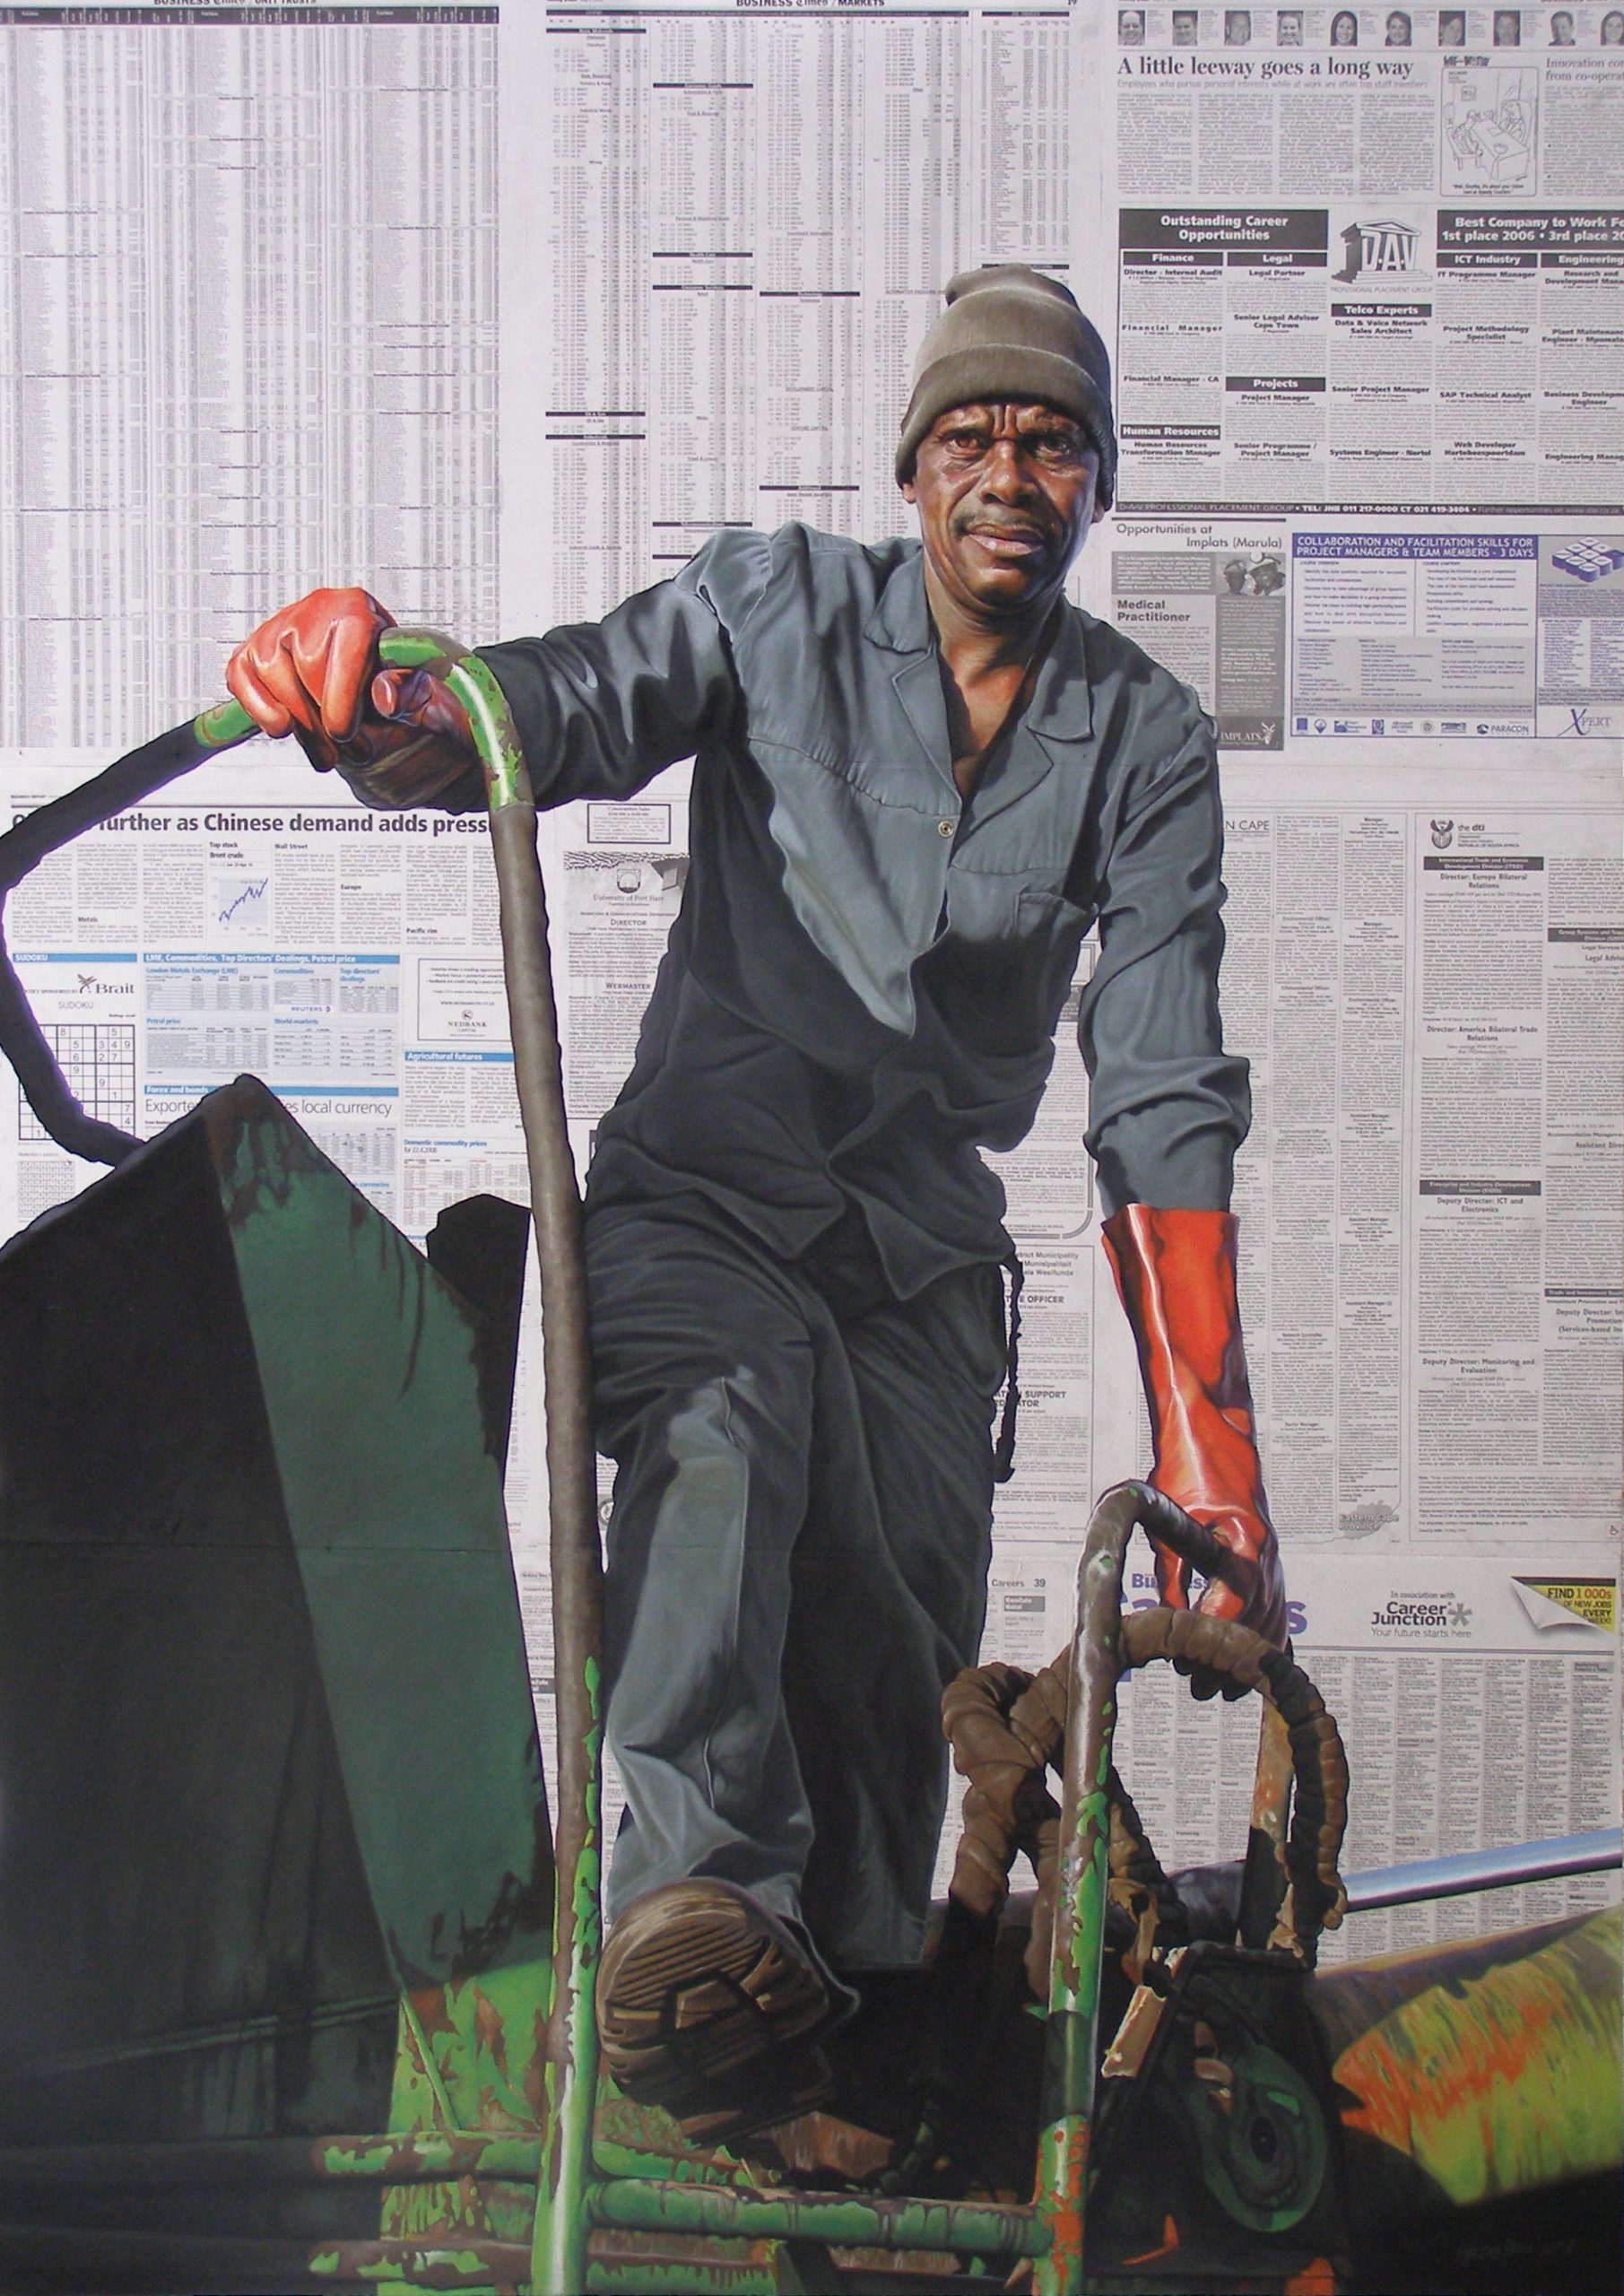 Moving the Trucks out at Dawn II

170cm x 120cm

Pastel on newspaper